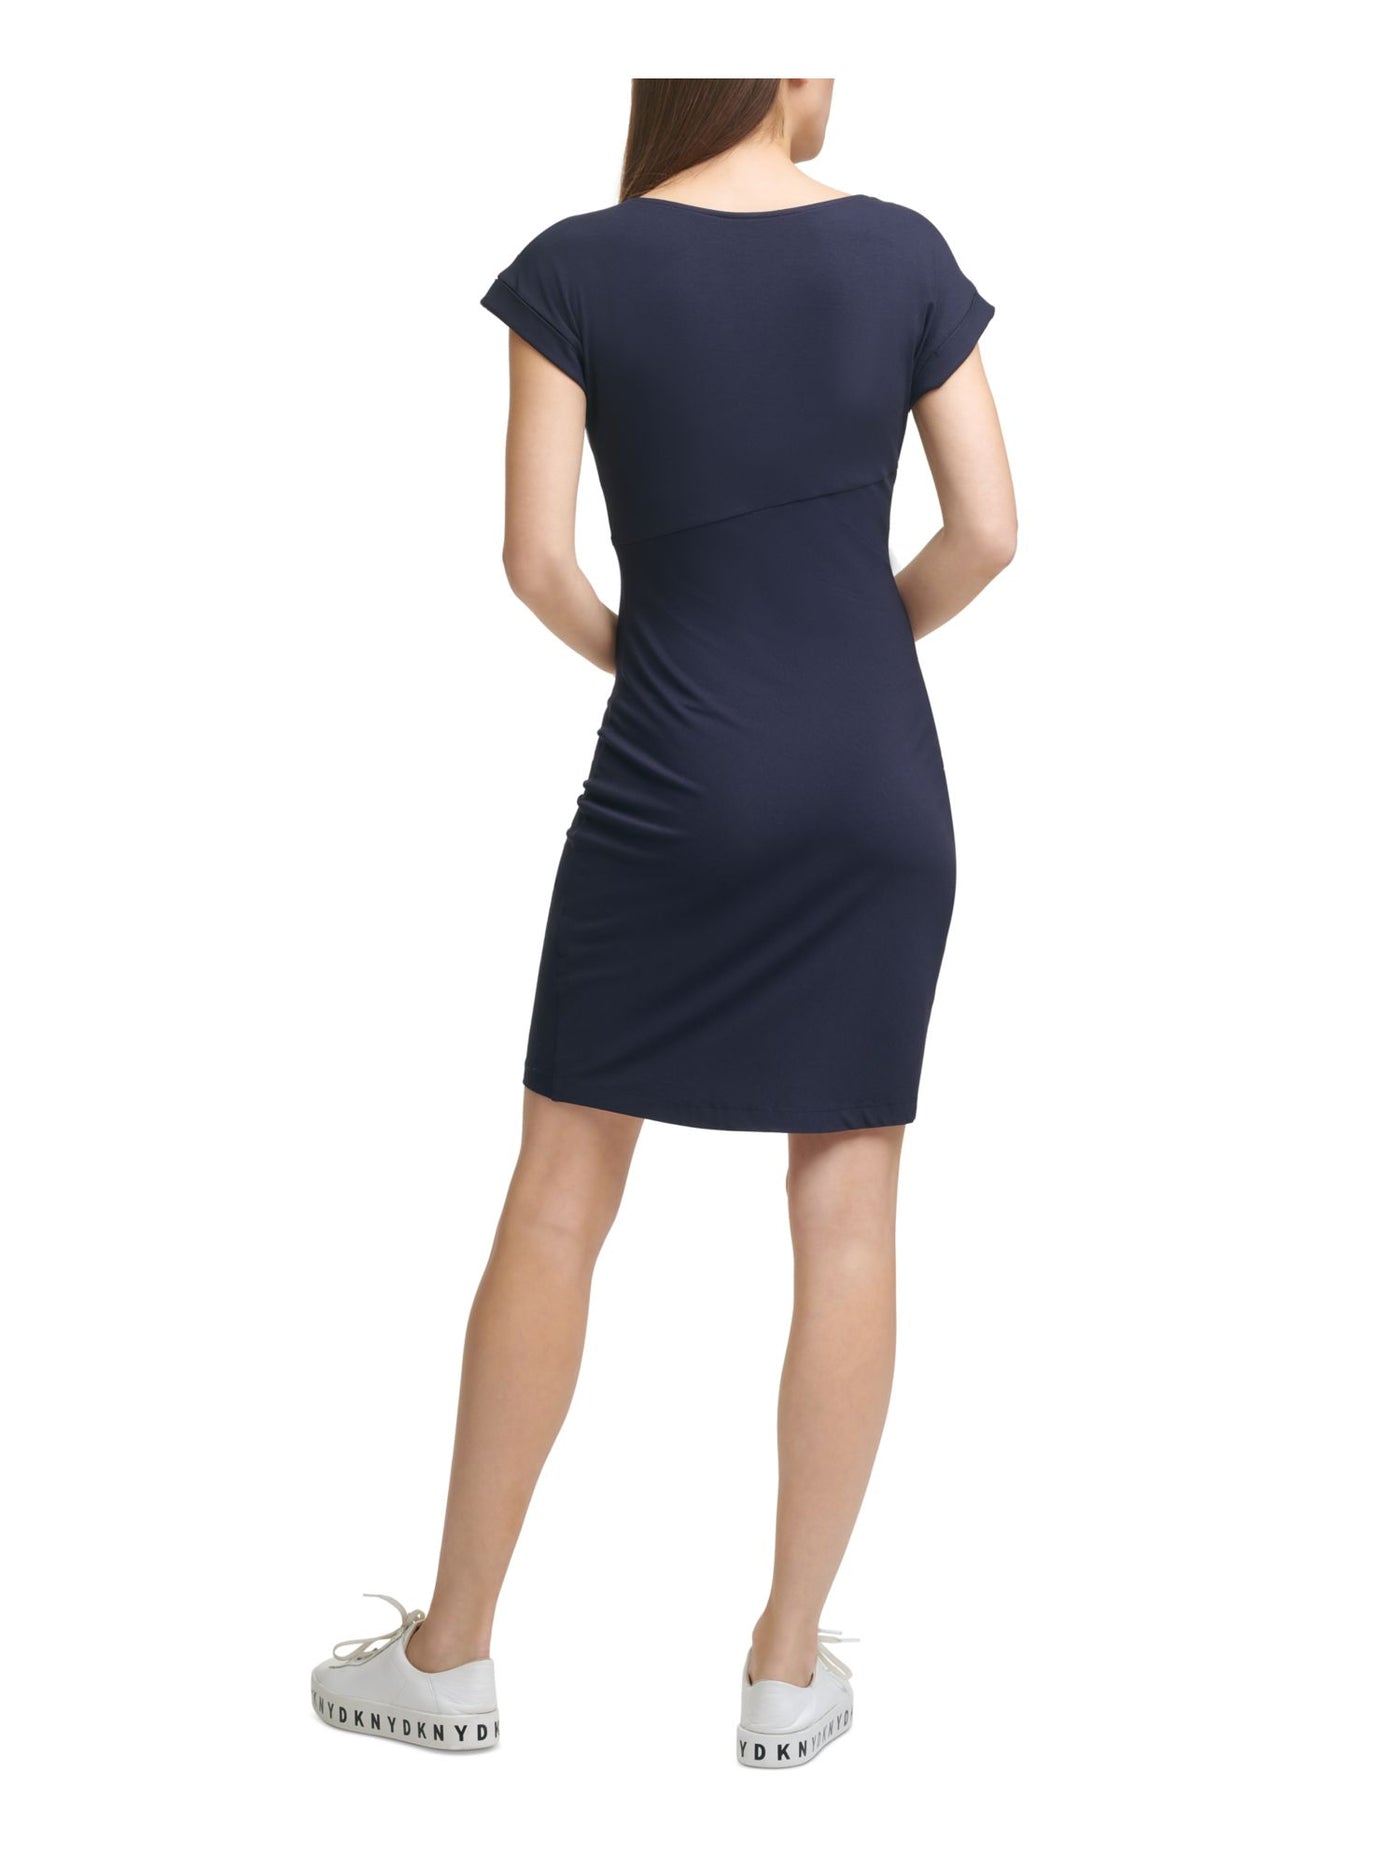 DKNY Womens Navy Stretch Gathered Pull Over Style Cap Sleeve Jewel Neck Above The Knee Sheath Dress L